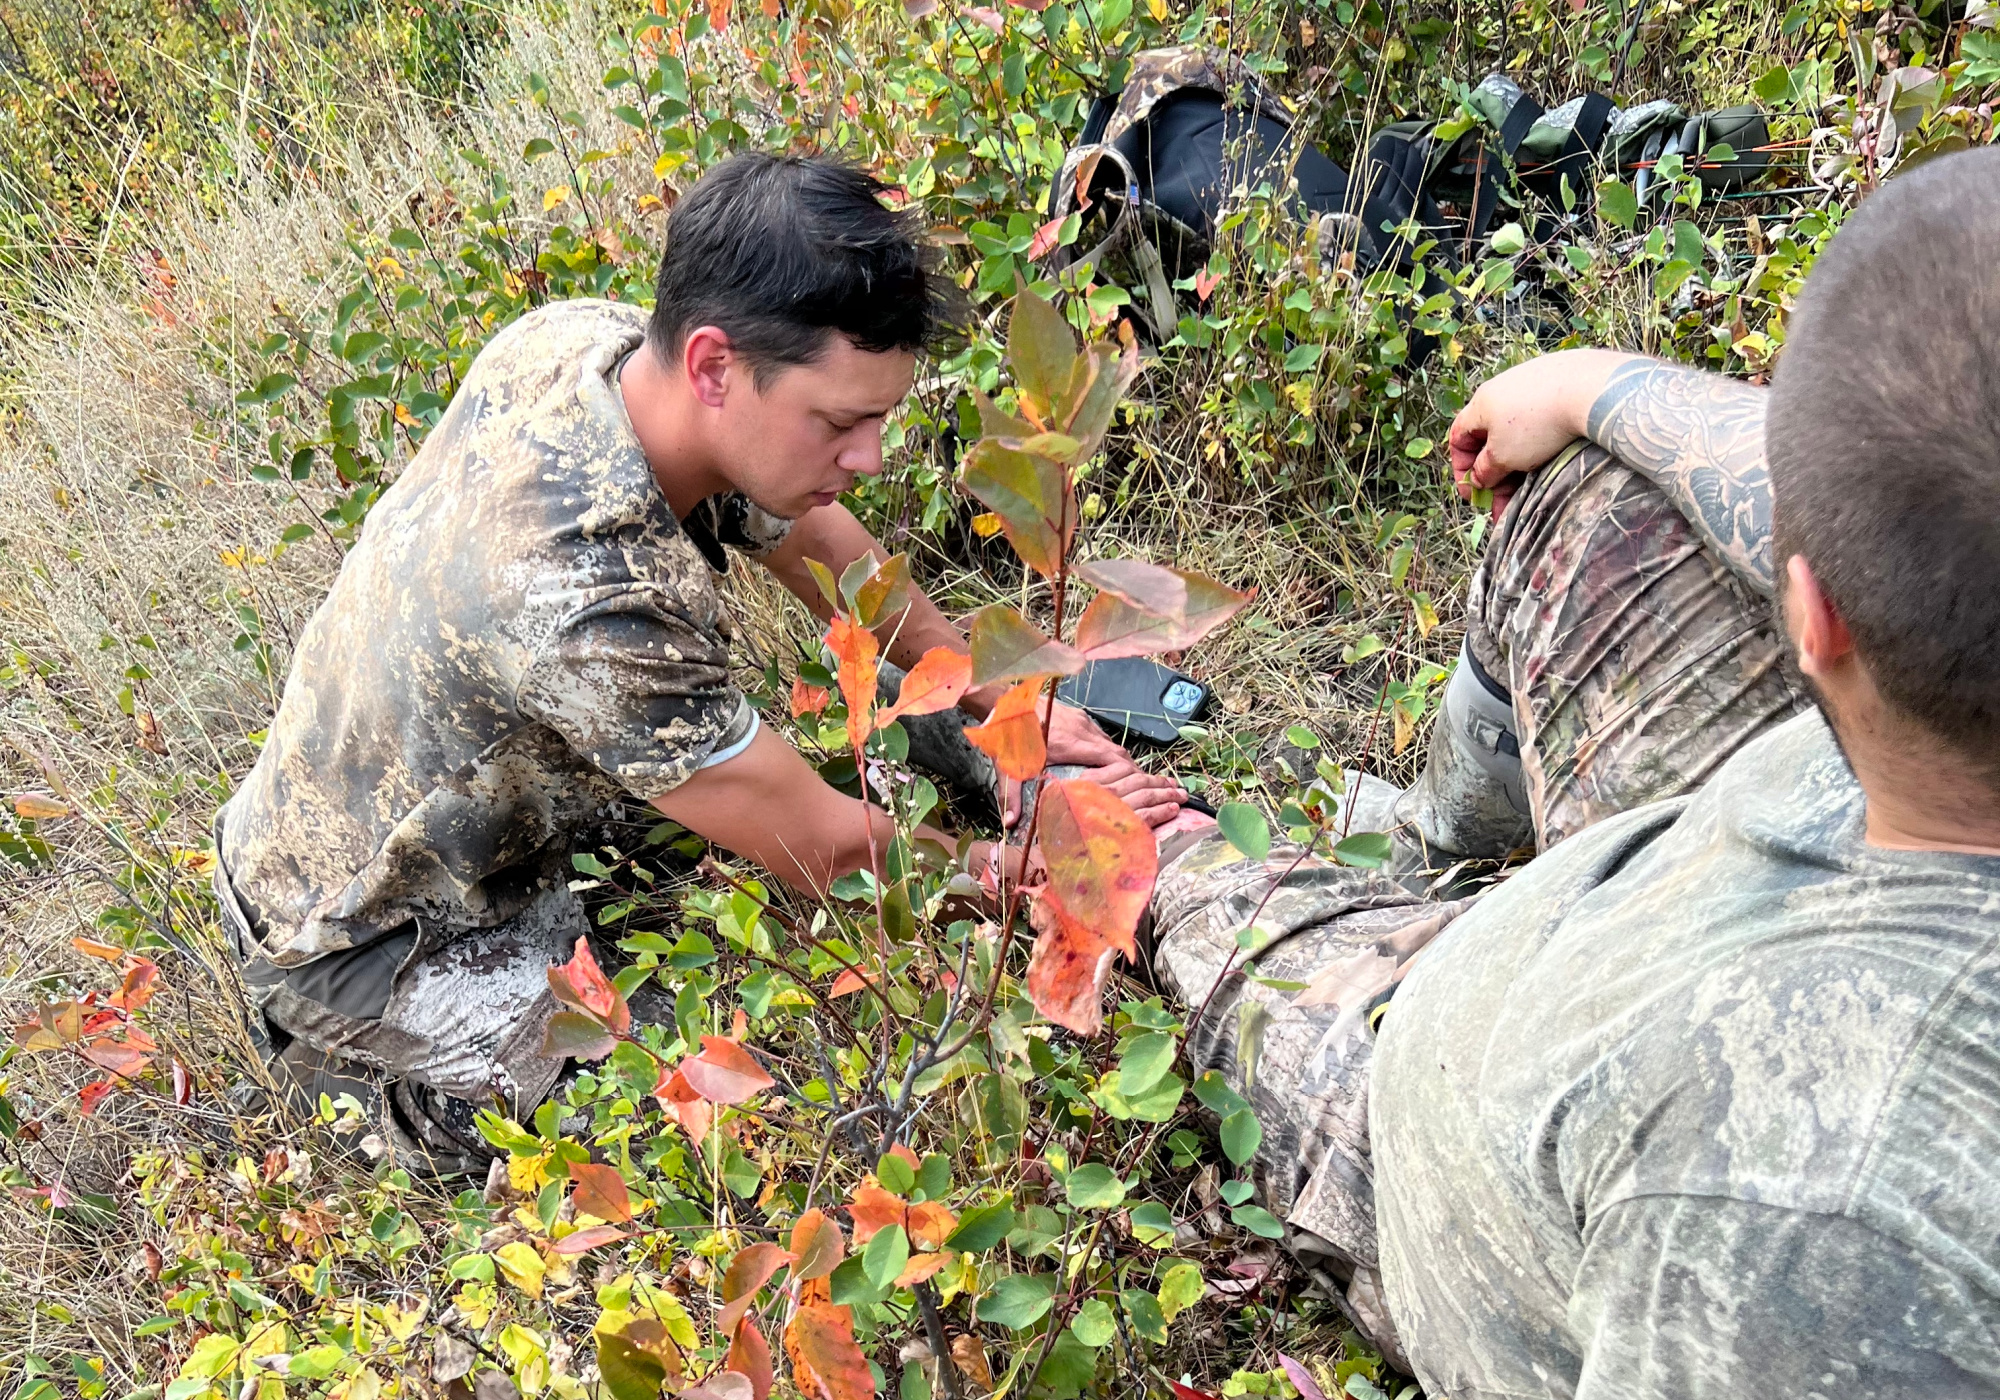 “10 Inches of Arrow Were in My Leg.” Bowhunter Suffers Freak Accident on Elk Hunt